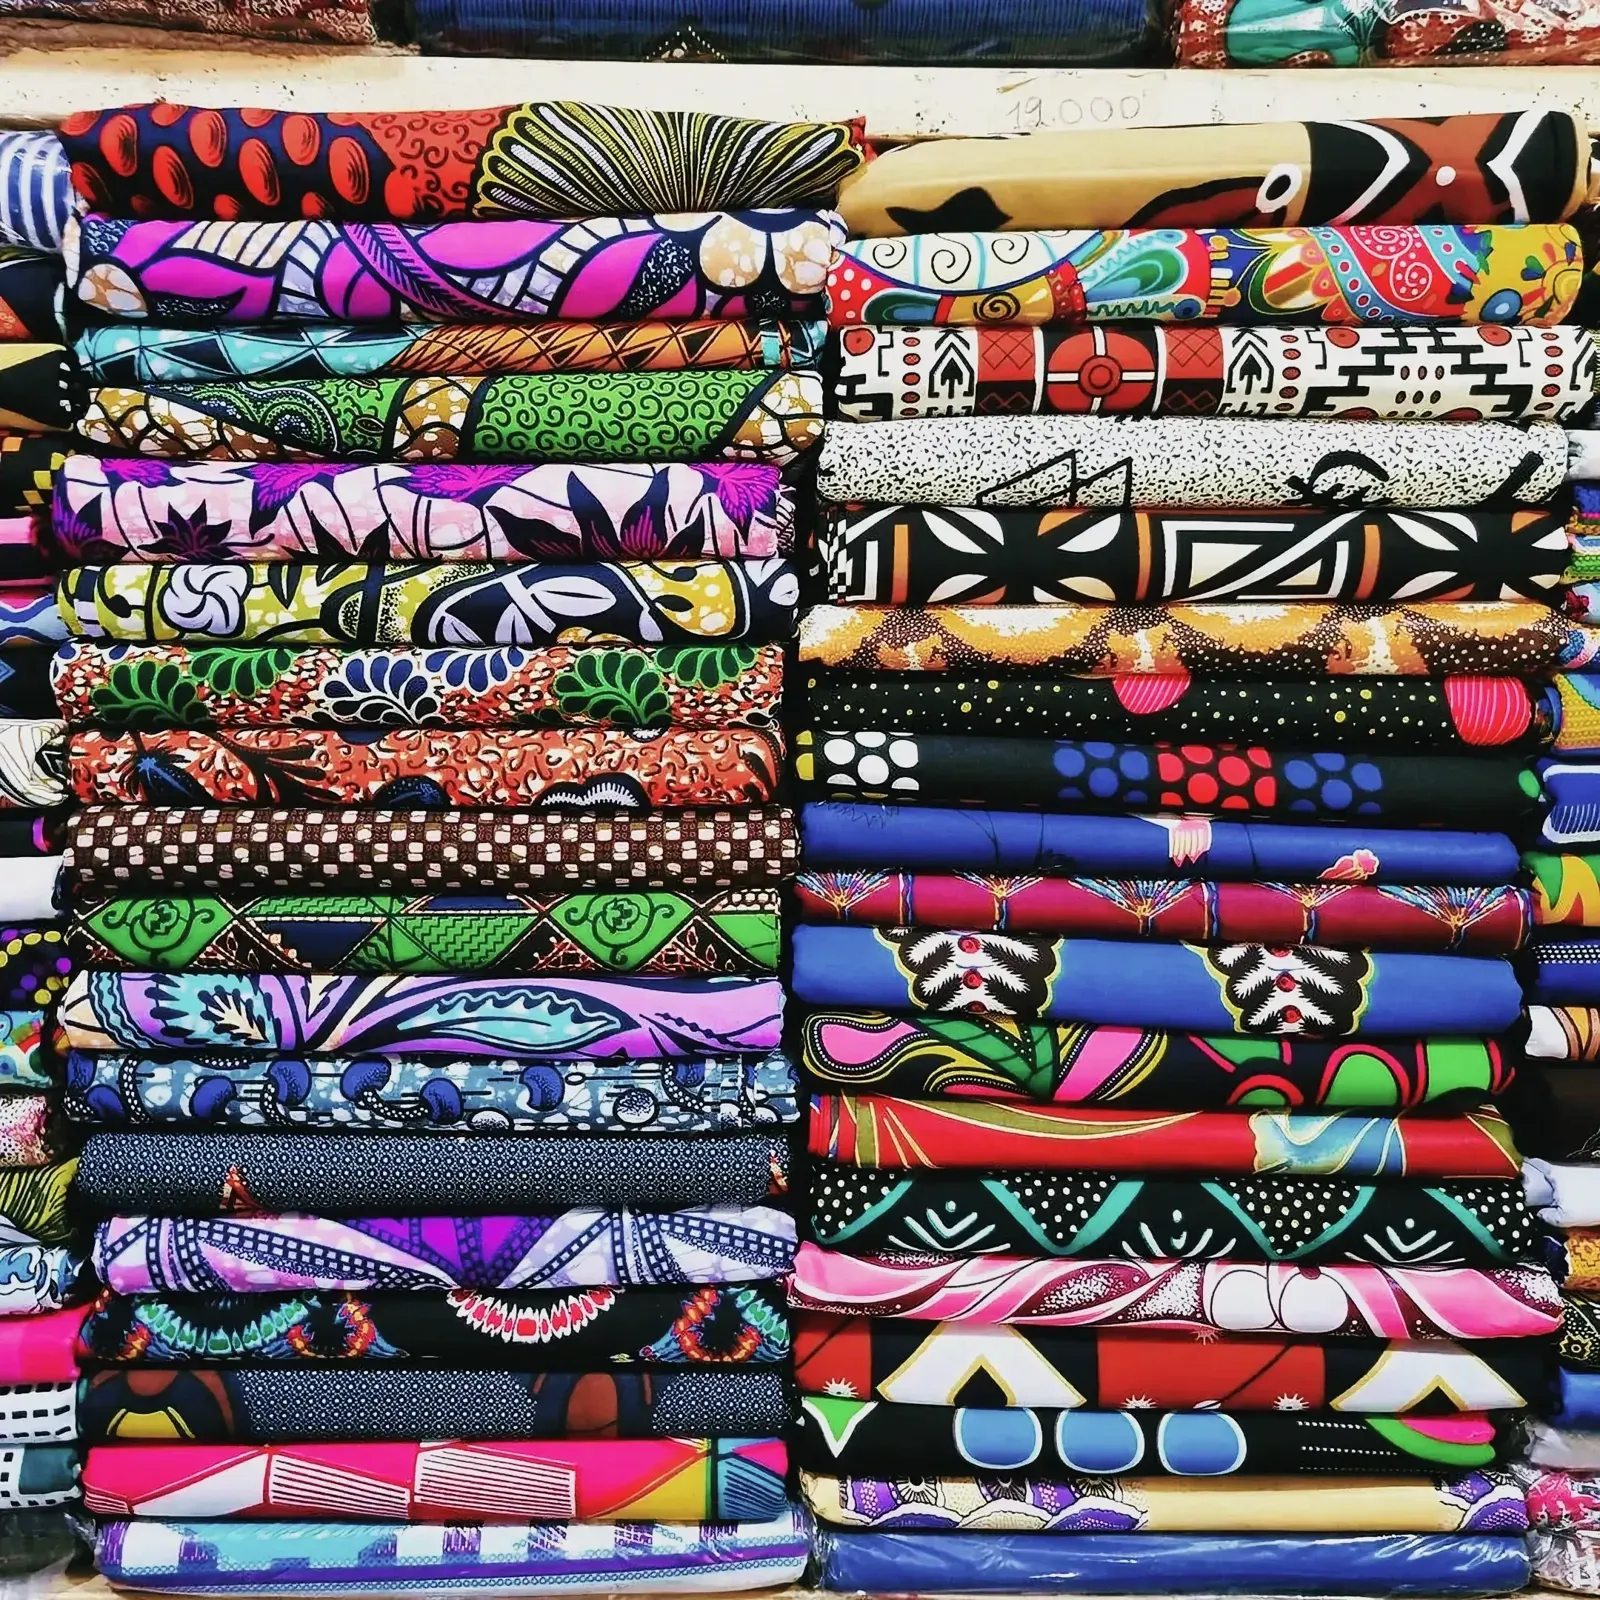 Assorted vibrant fabrics at a market in Lomé, Togo